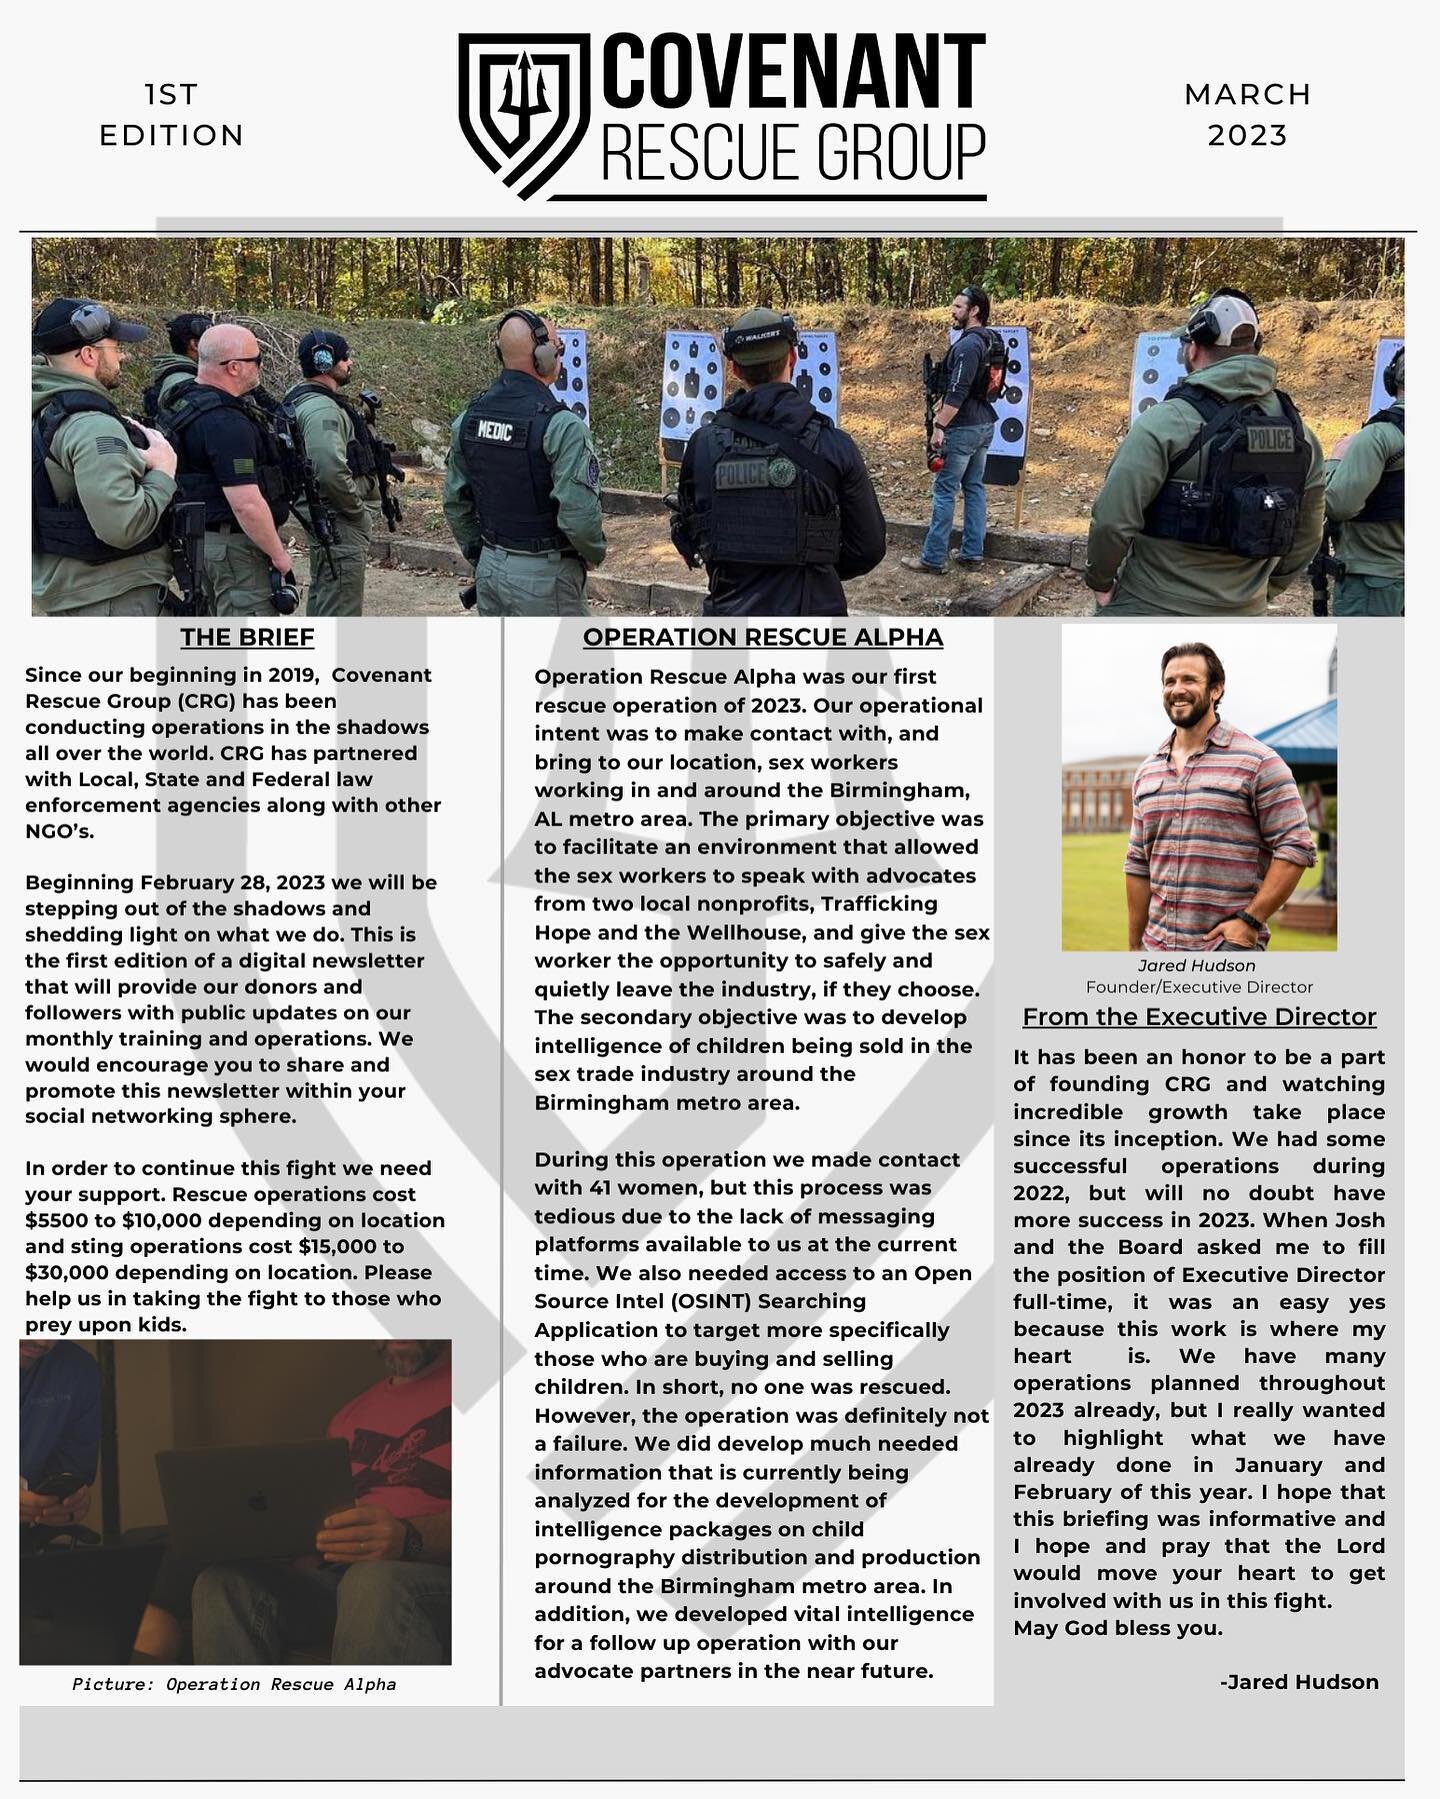 The 1st edition of the NEW Covenant Rescue Group newsletter is now available! If you would like to keep up-to-date with everything CRG, send us a message with your name and email address and we will get you added to the list. Thank you!

#endit #huma